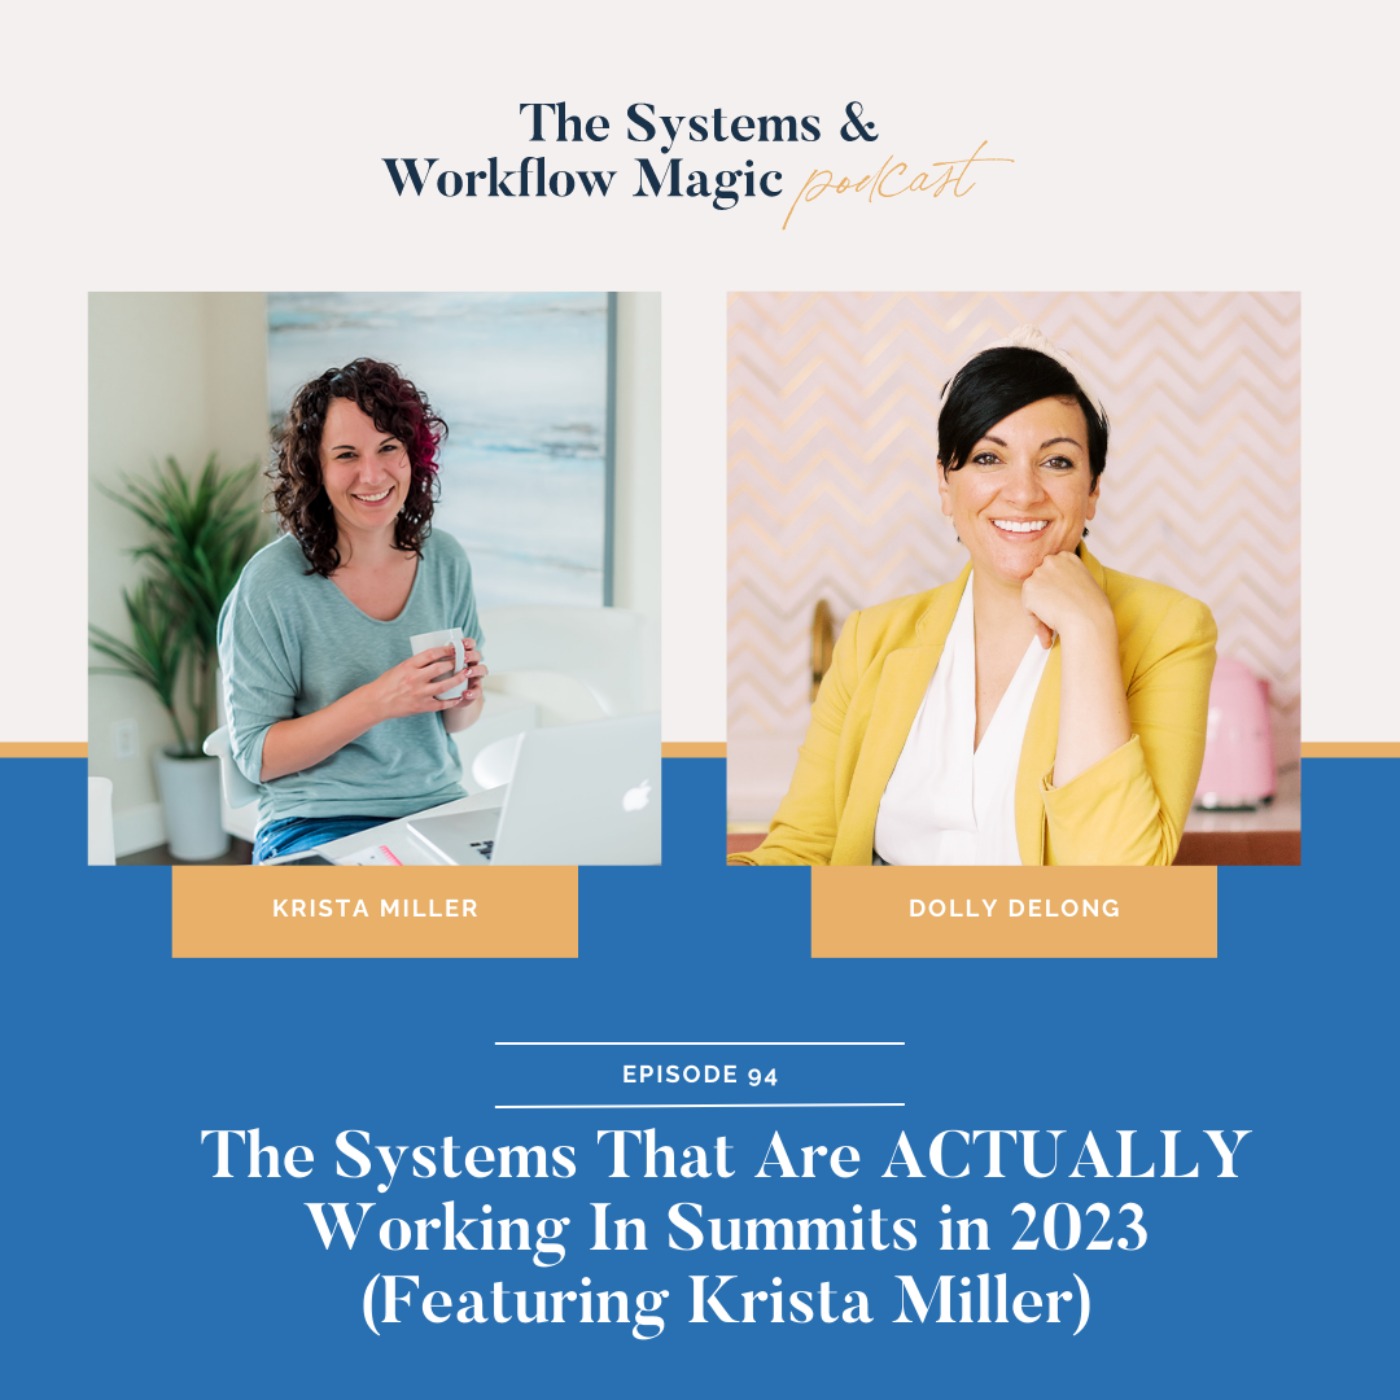 94: The Systems That Are ACTUALLY Working in Summits in 2023 (featuring Krista Miller)